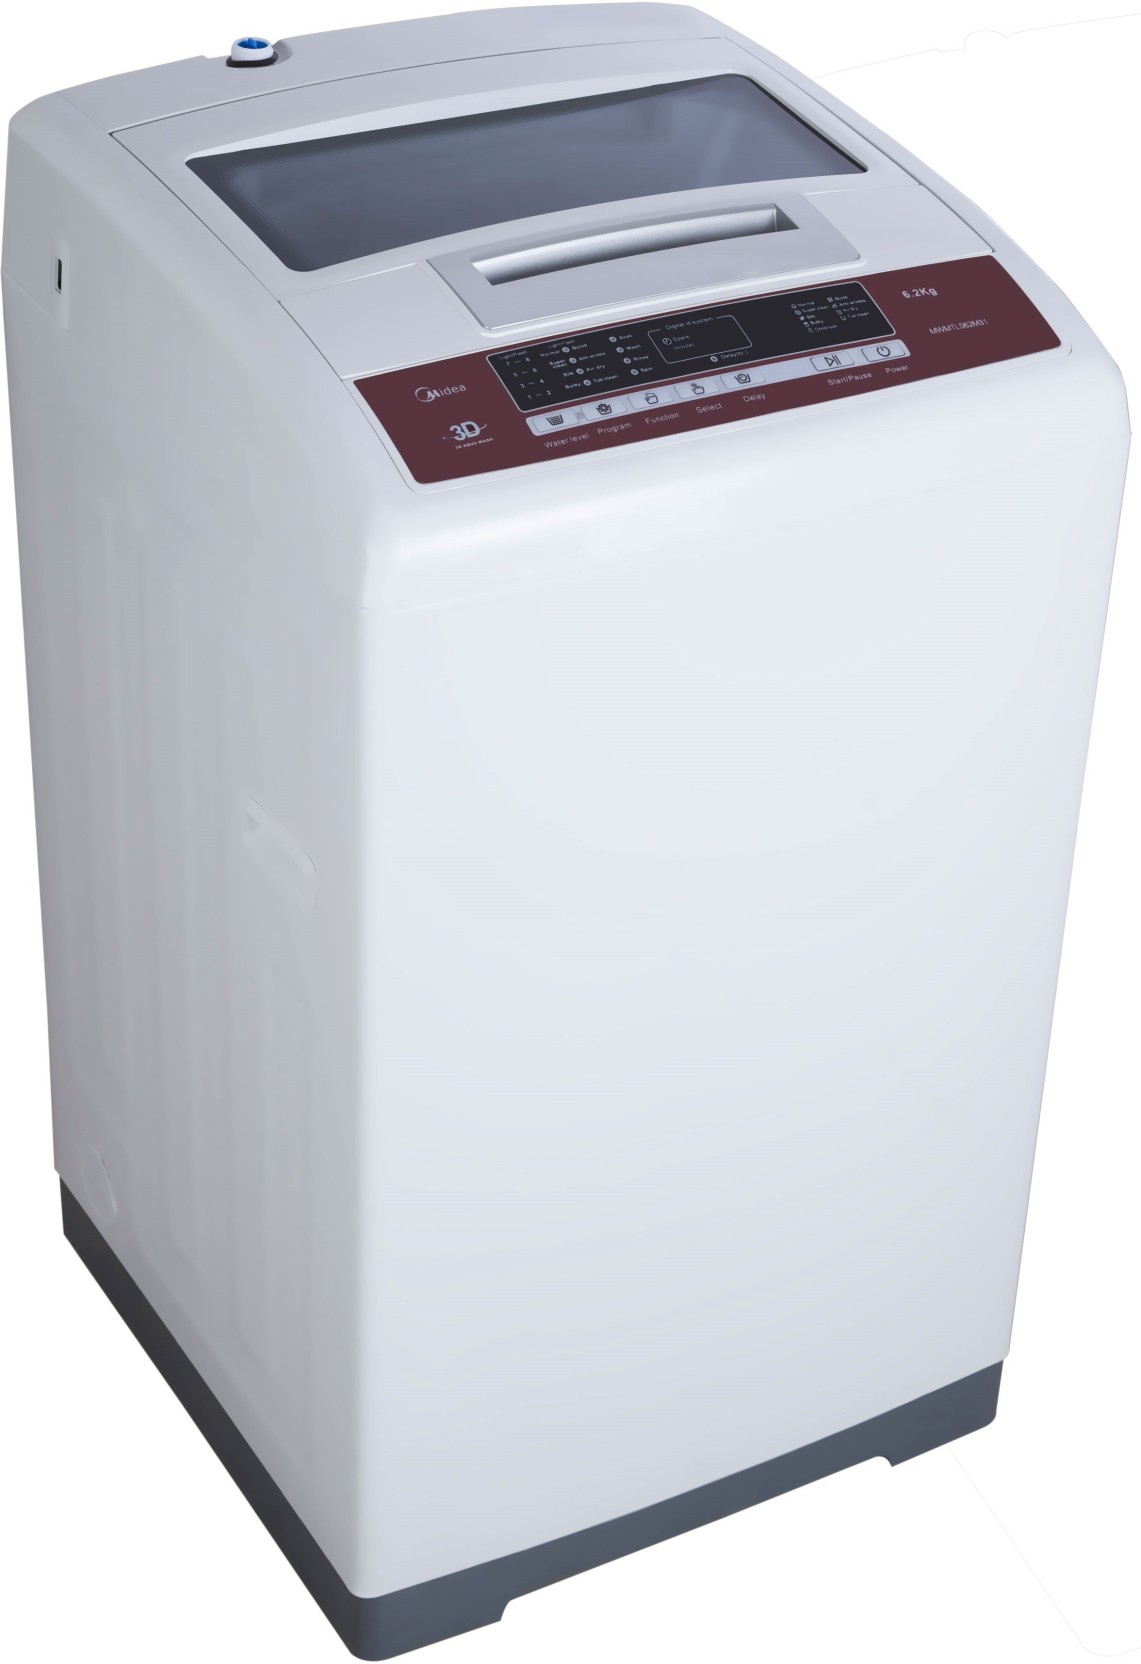 carrier-midea-6-2-kg-fully-automatic-top-load-washing-machine-price-in-india-buy-carrier-midea